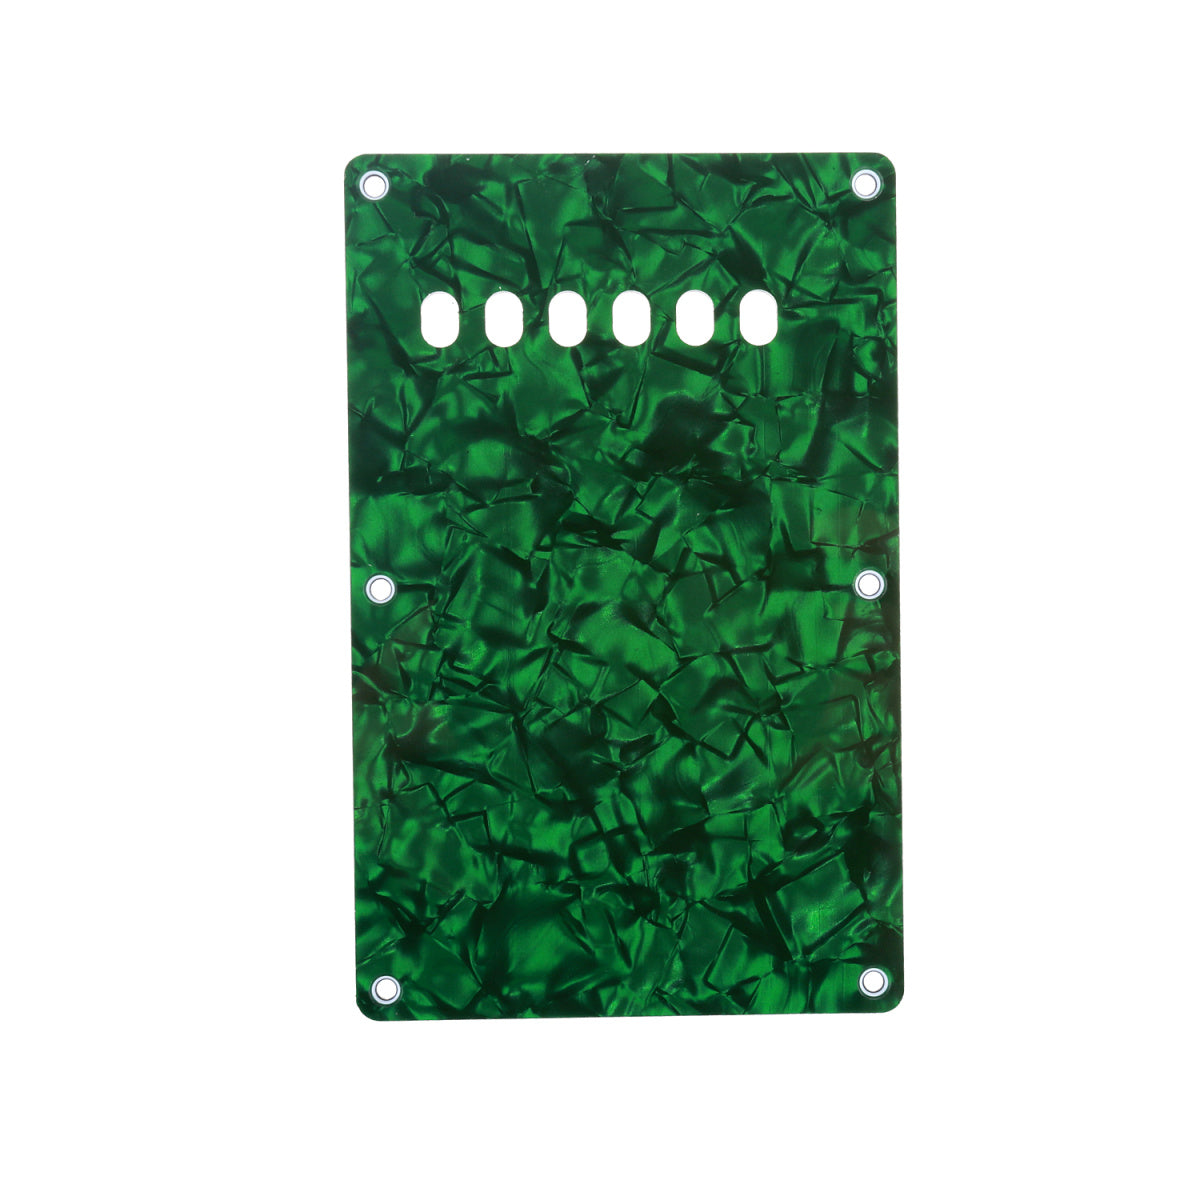 Musiclily 6 Hole Guitar Back Plate for China Made Squier, 4Ply Green Pearl